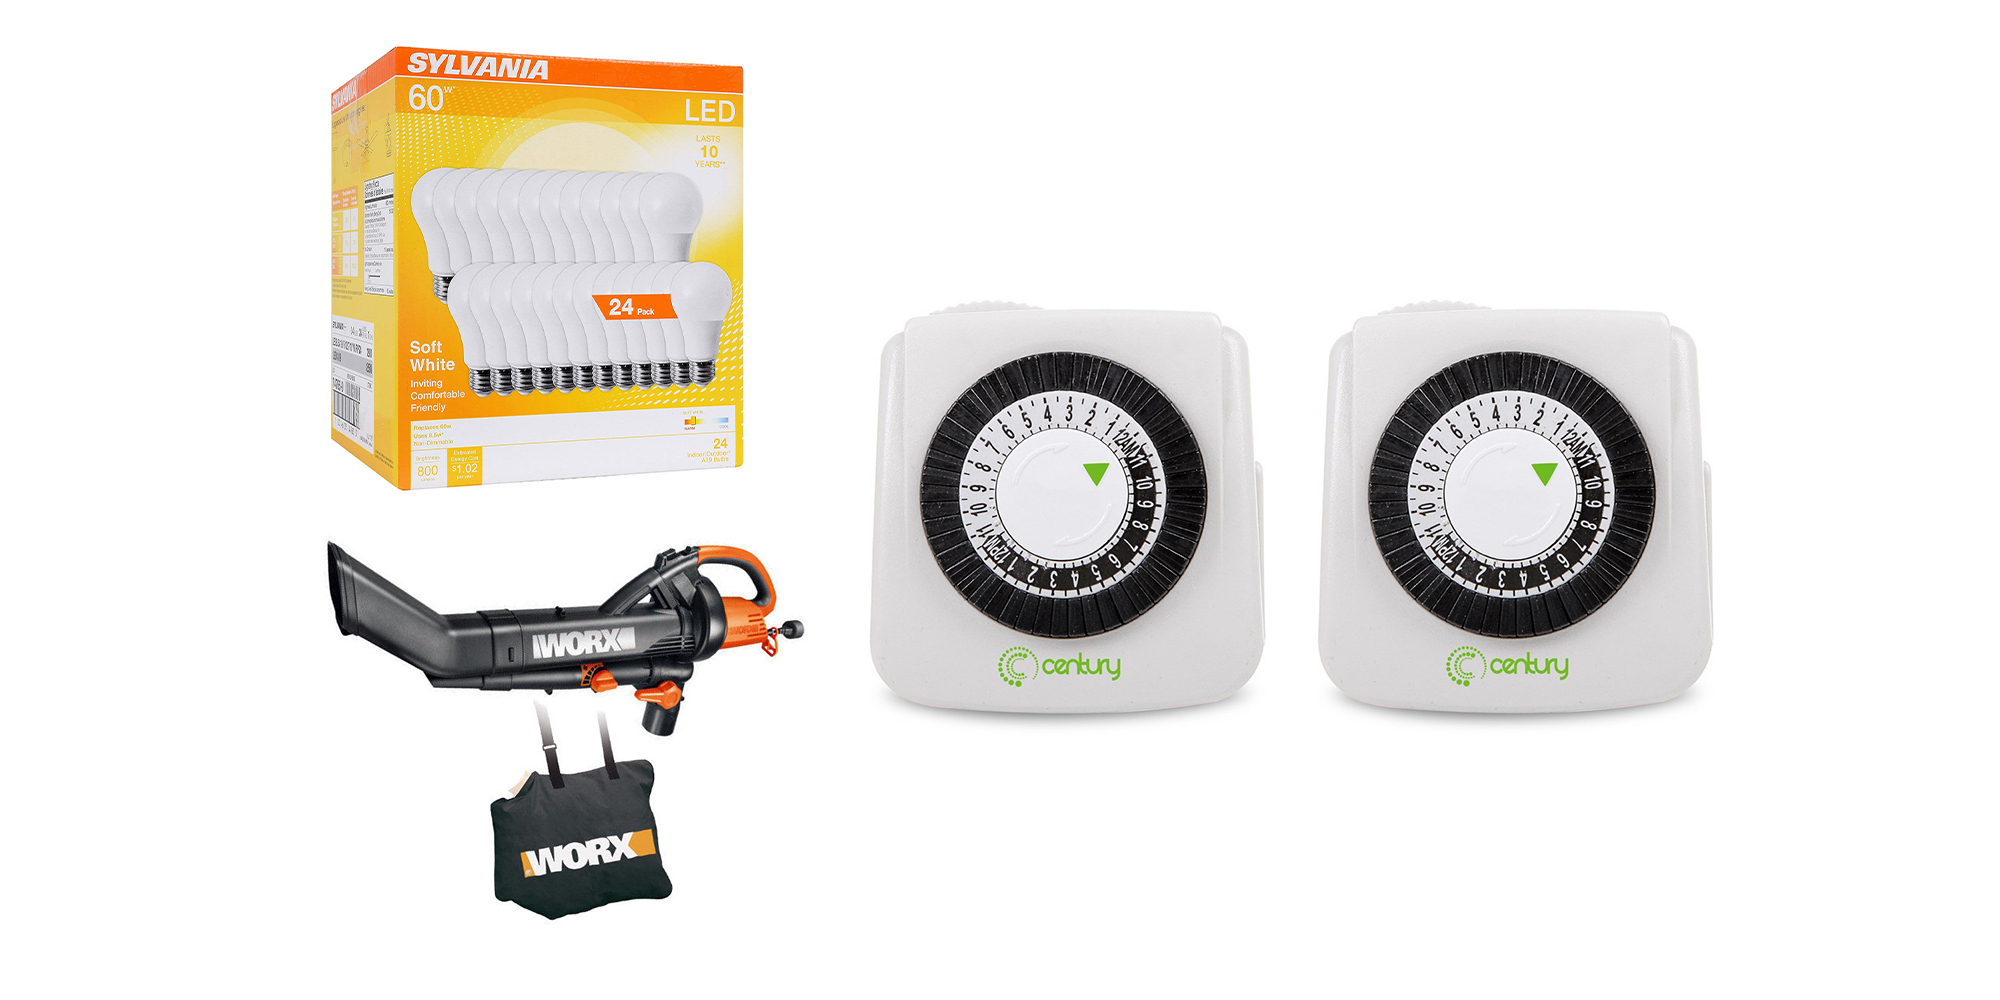 Today’s best Green Deals include two outlet timers for $7, a 24-pack of LED bulbs, and more